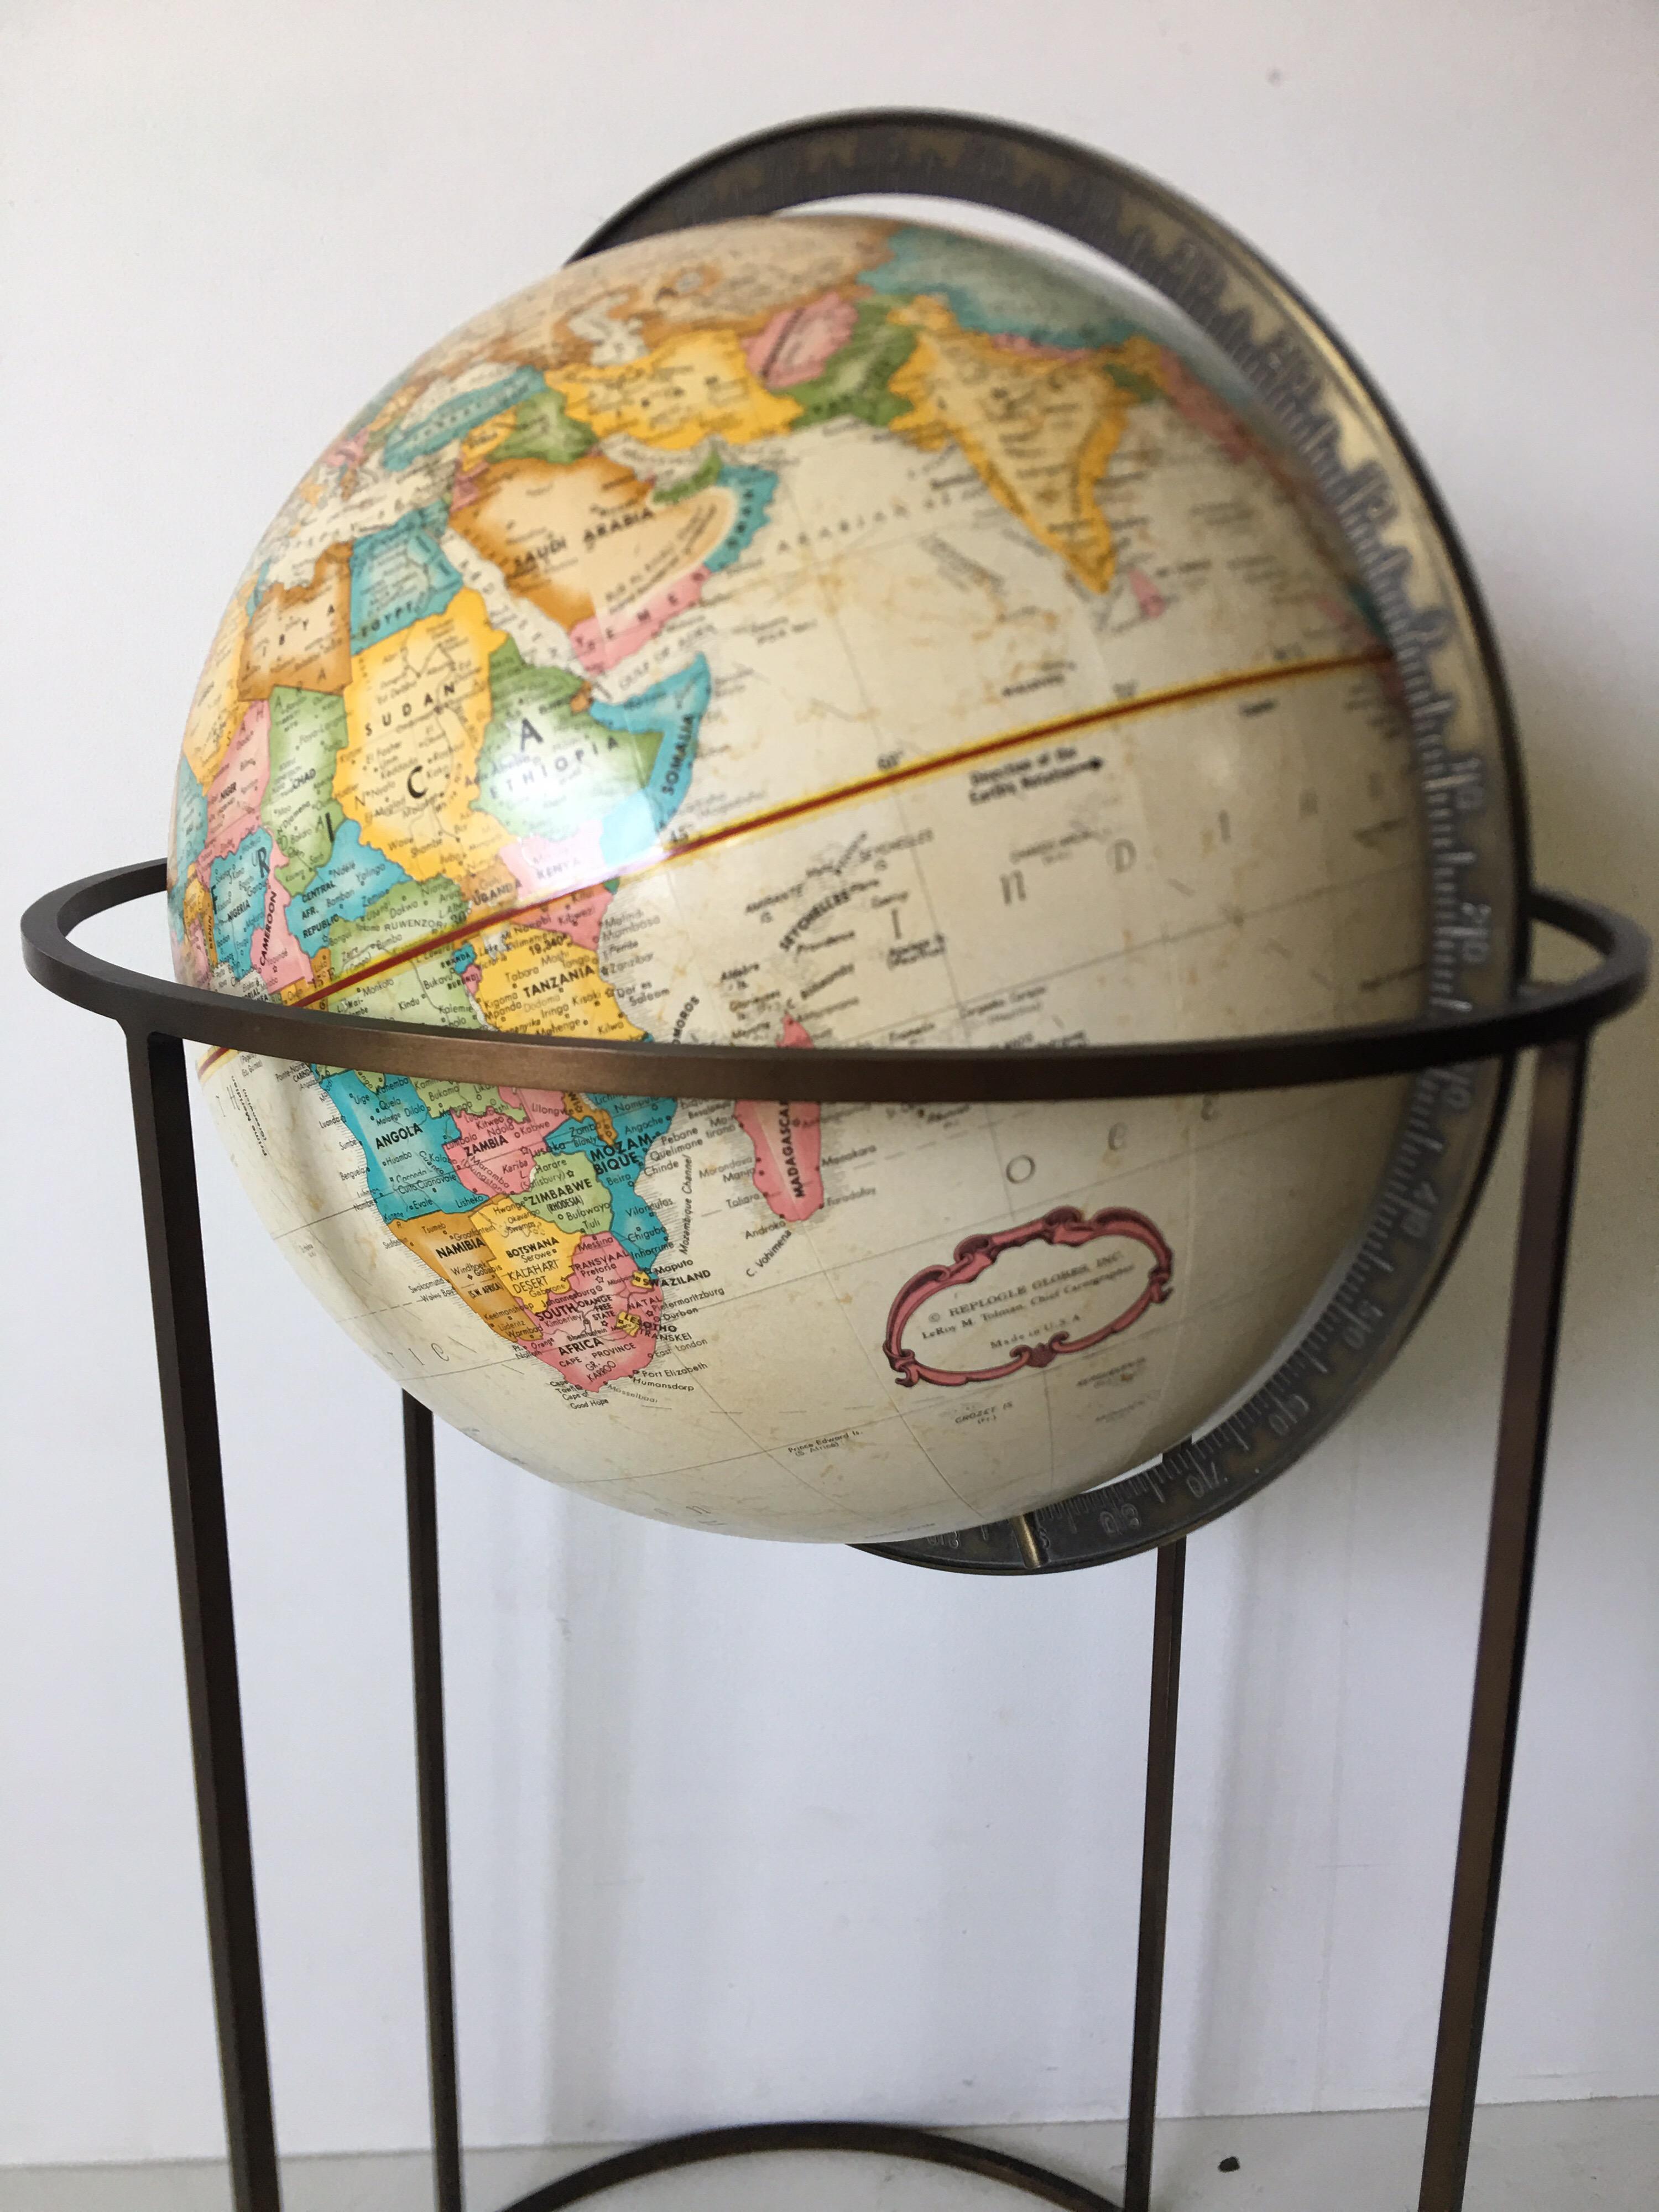 This is a nice larger size world globe by Replogle. It is 16